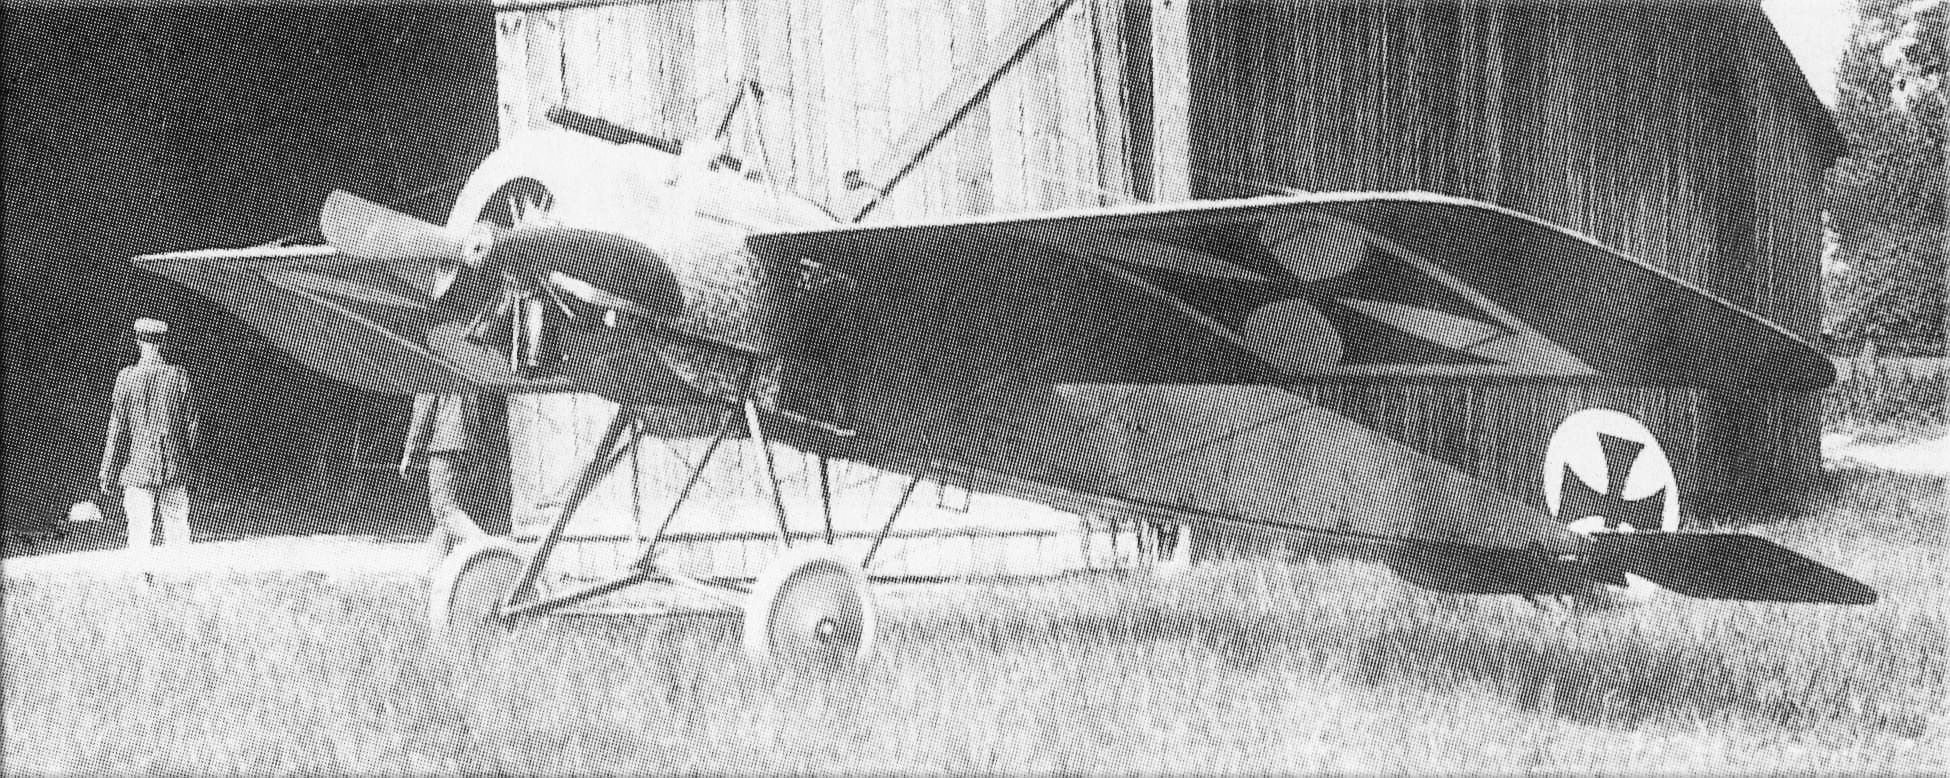 Lieutenant Kurt Wintgens achieves the first known aerial victory with a synchronized gun-equipped fighter plane, the Fokker M.5K/MG Eindecker